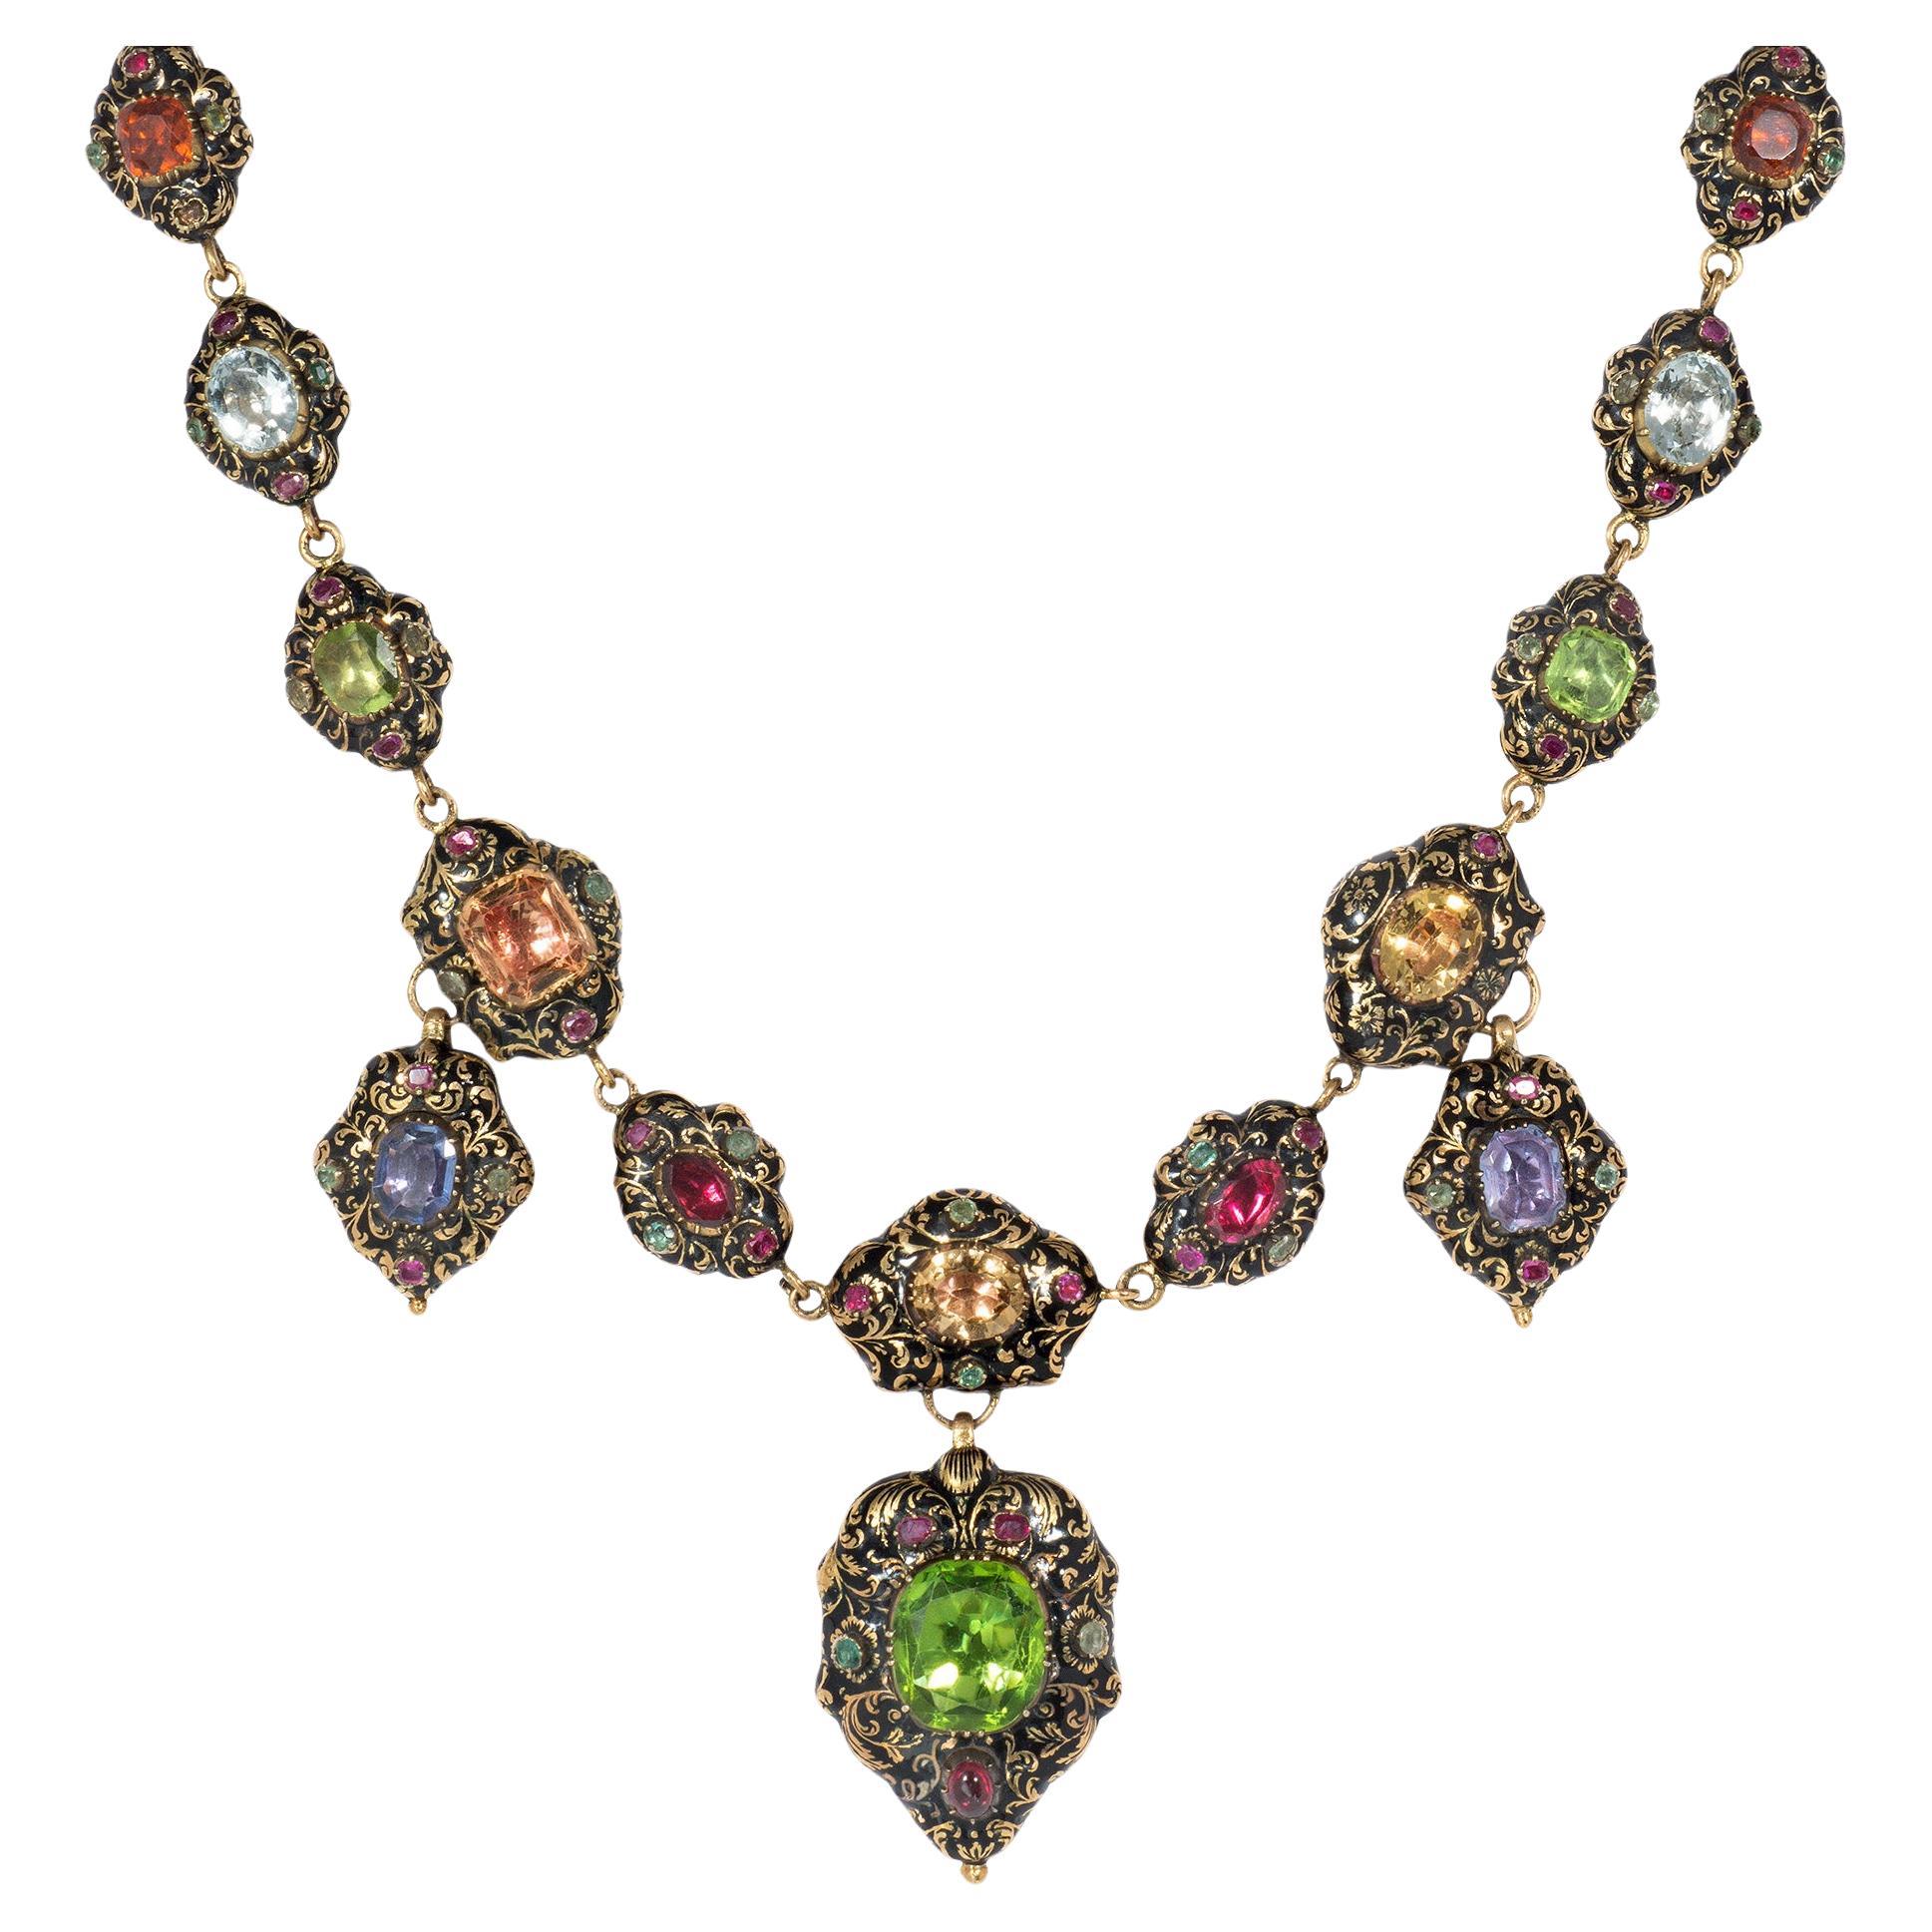 Important Antique Early-19th Century Swiss Enamel, Gold, and Multi-Gem Necklace For Sale